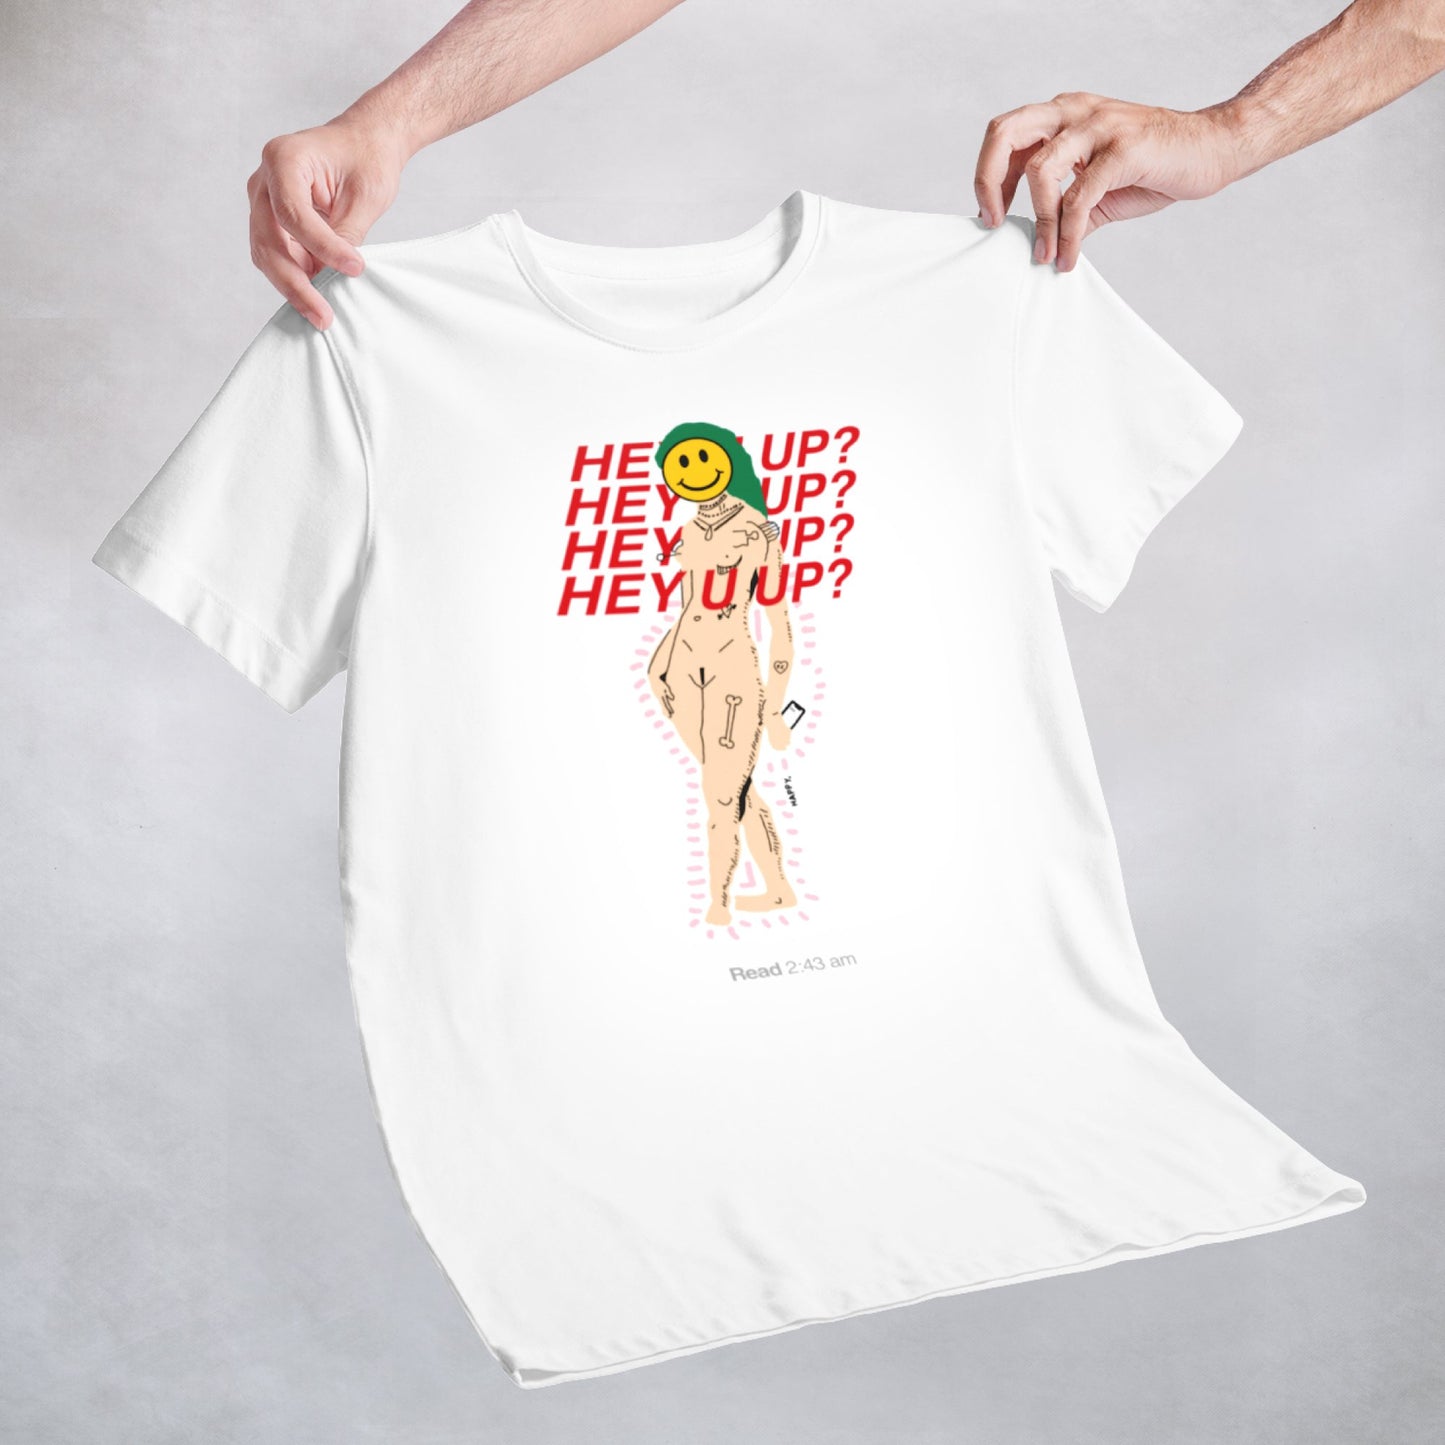 Classy Duds Short Sleeve T-Shirts Hey U Up Tee by Happy Thrilmore